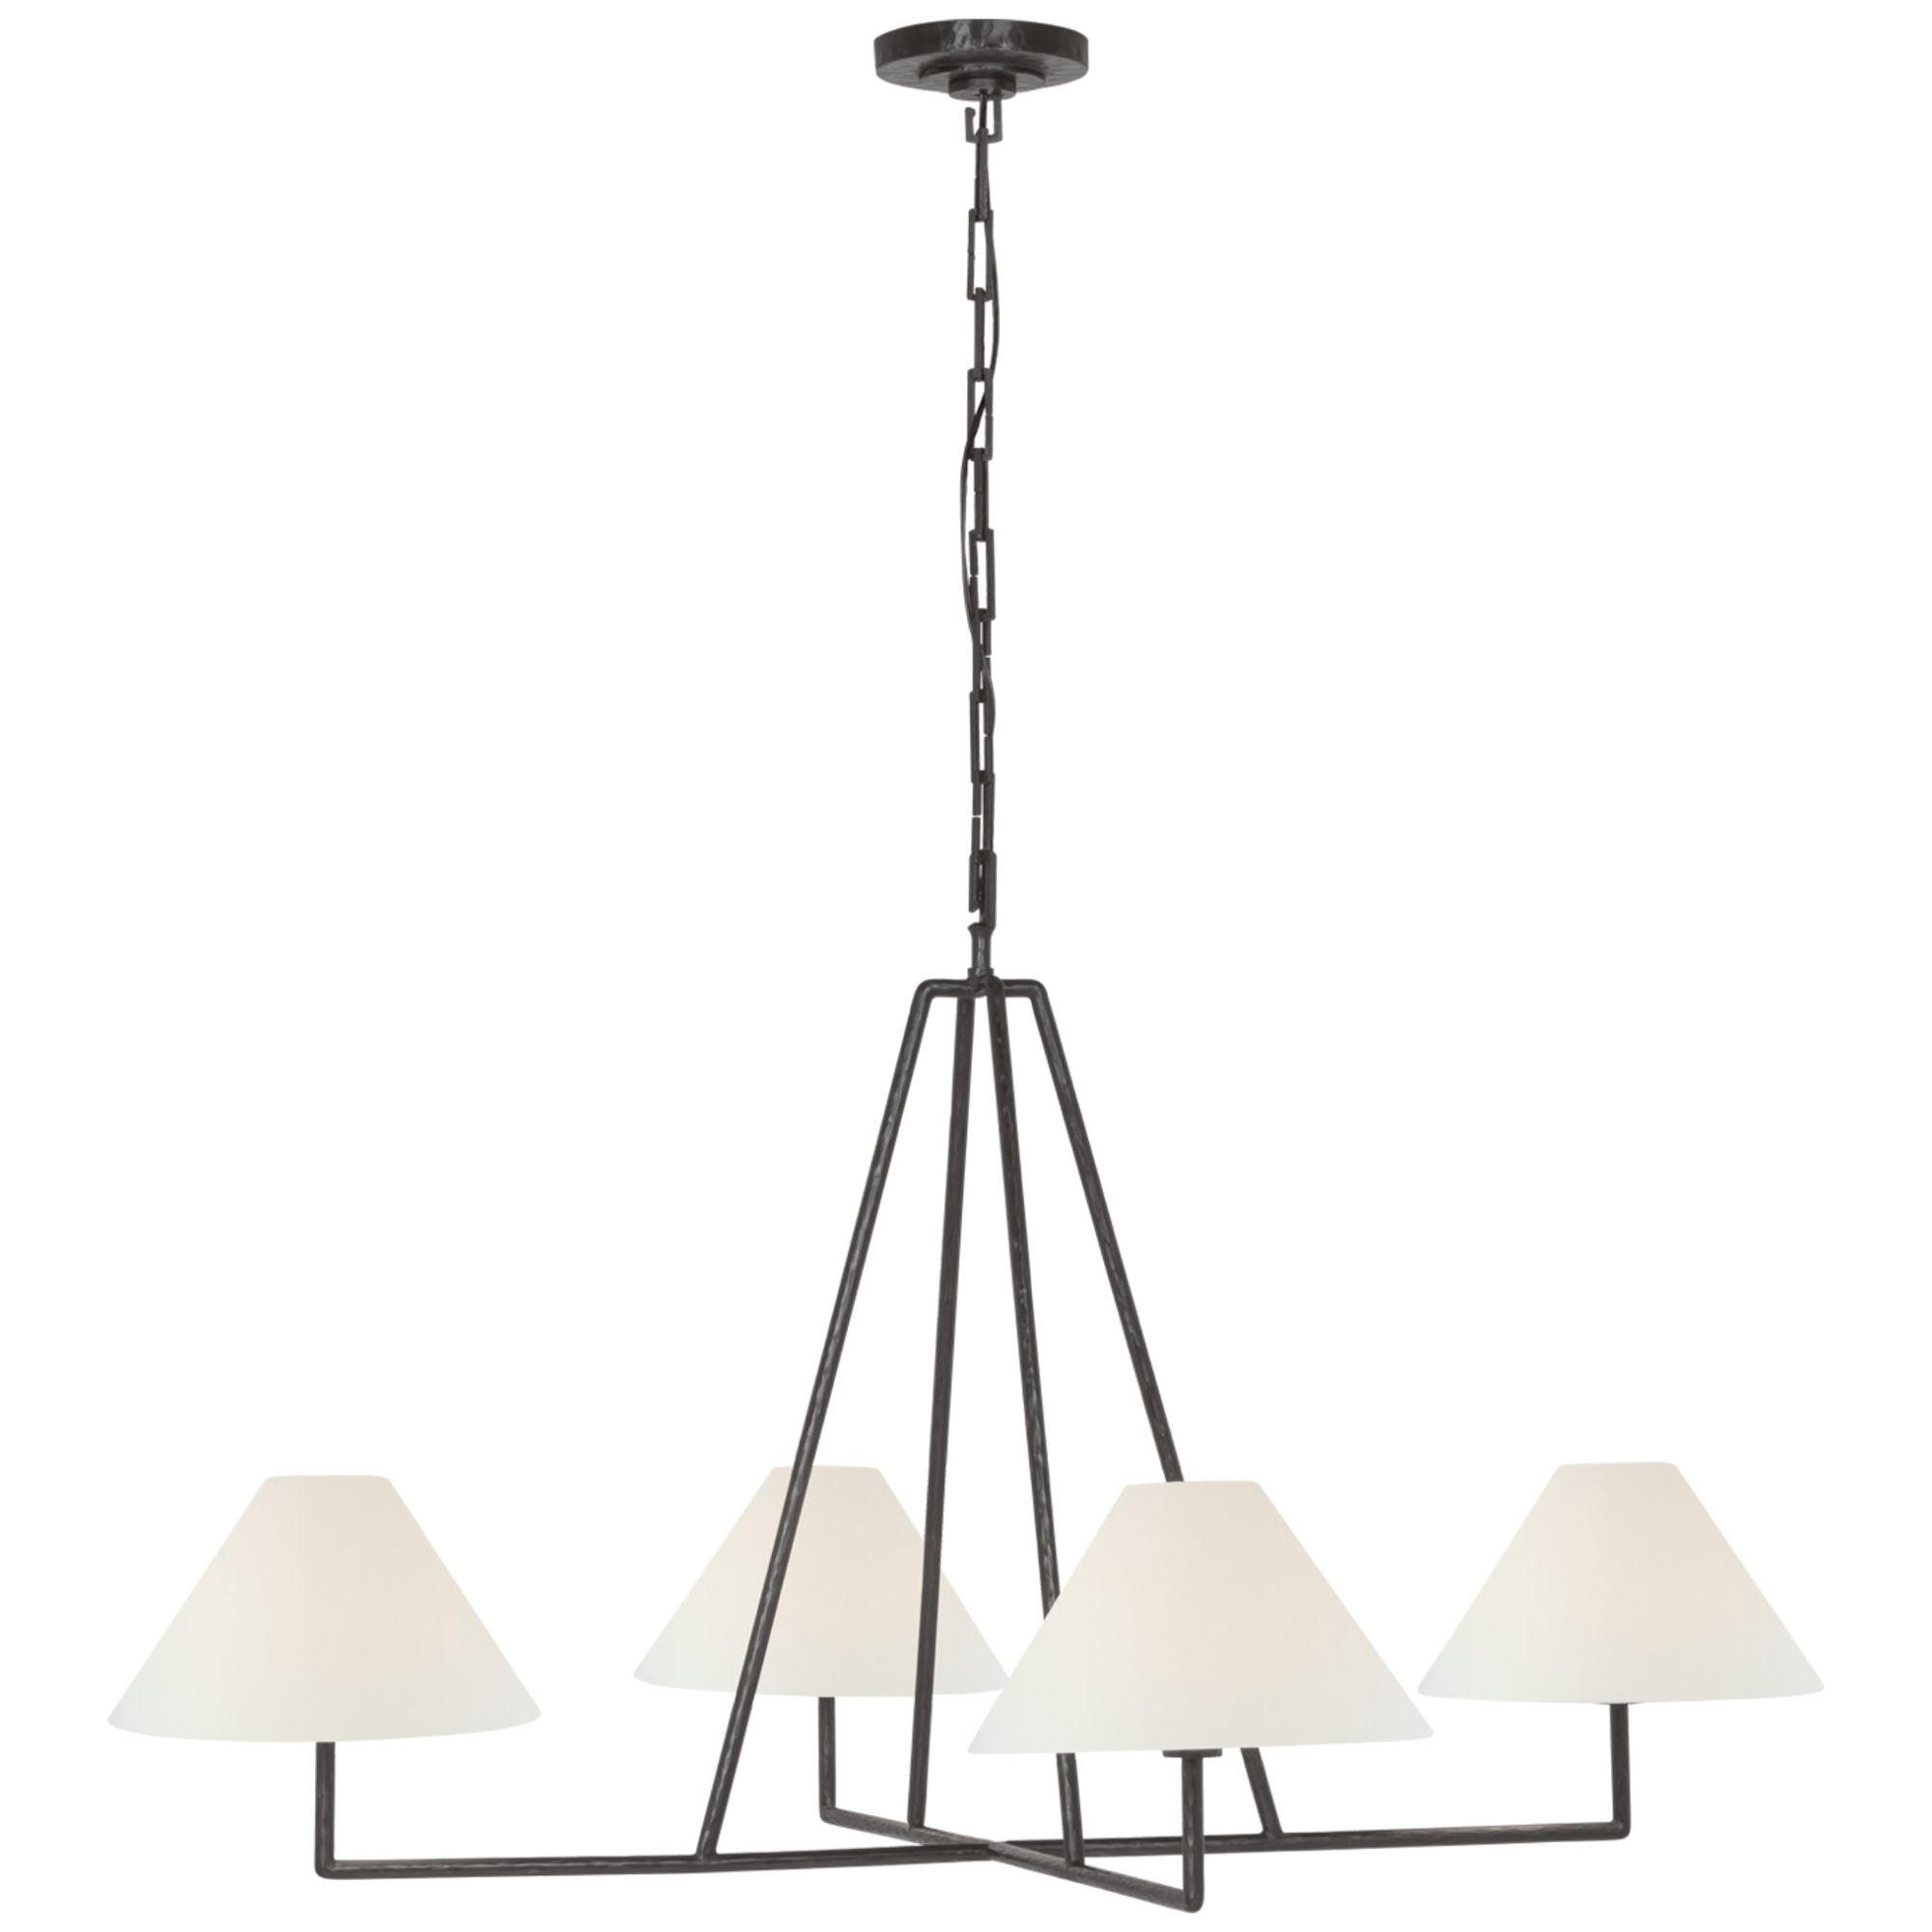 Chapman & Myers Ashton Extra Large Four Light Sculpted Chandelier in Aged Iron with Linen Shades